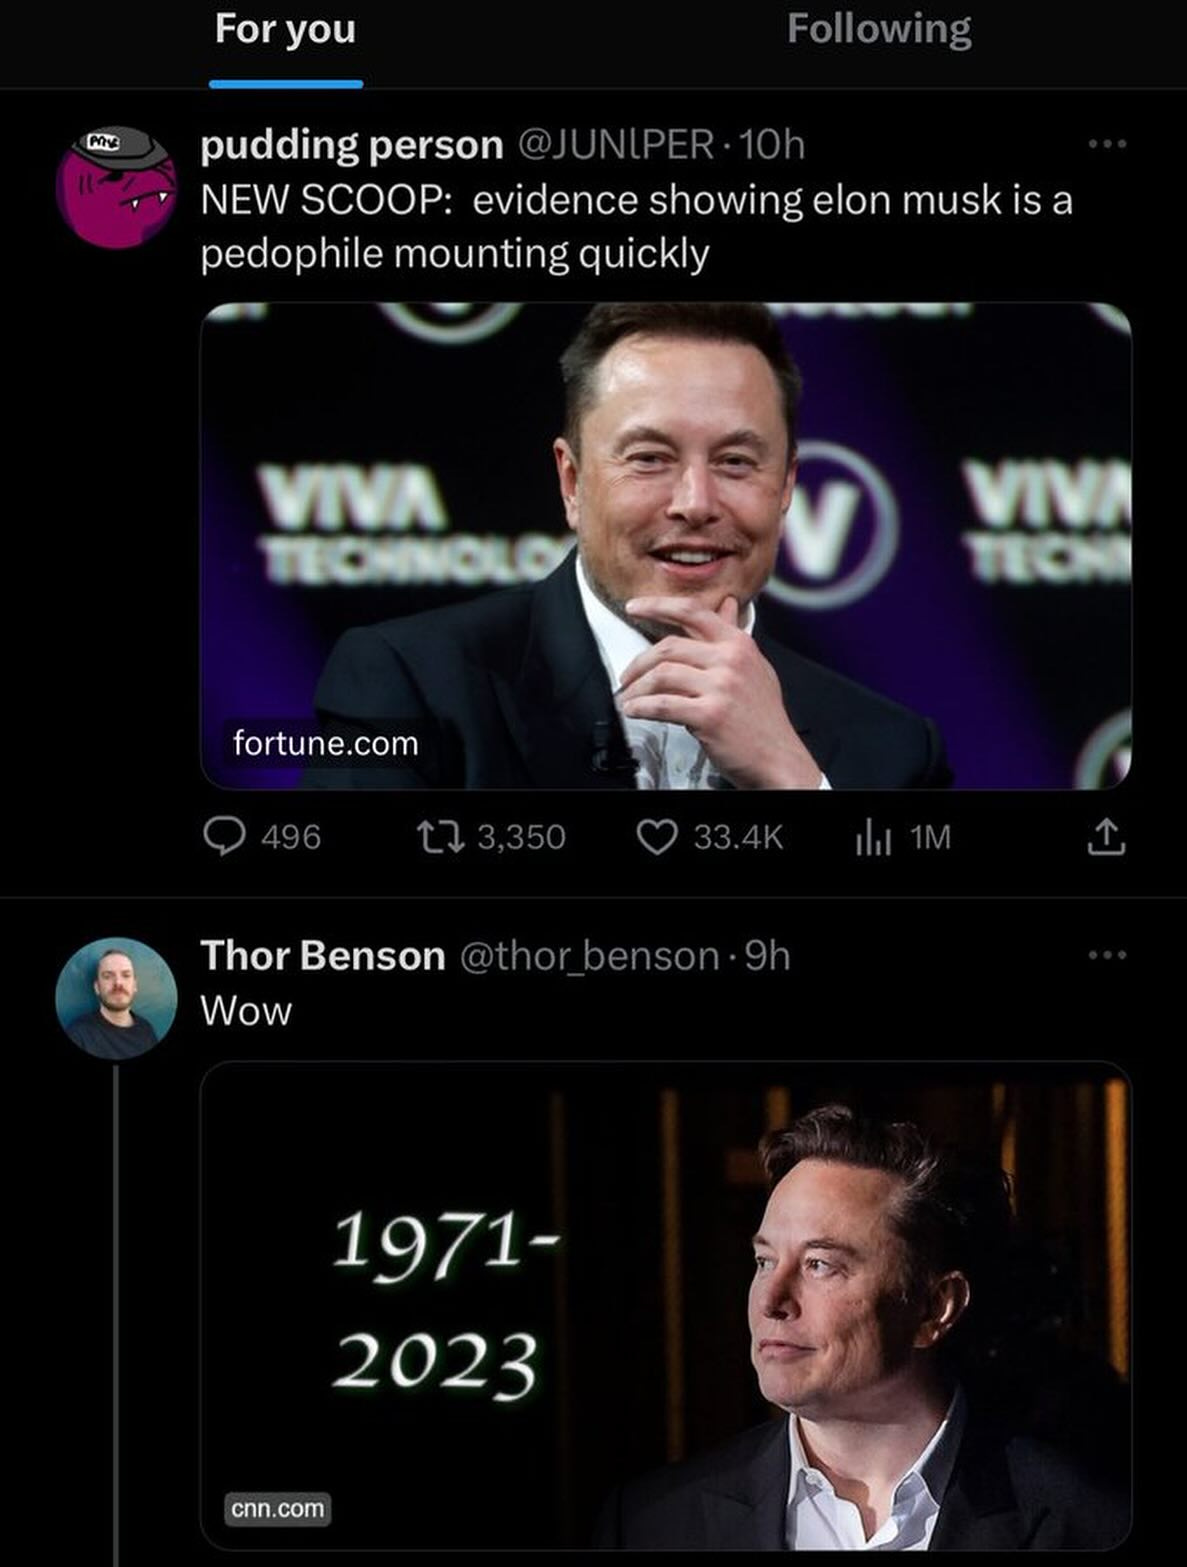 A screenshot from Twitter with two tweets. The first is a link from fortune.com with the caption written by the Twitter user, "NEW SCOOP: evidence showing elon musk is a pedophile mounting quickly.” The second tweet is an image of Elon Musk and '1971-2023' written on it from cnn.com, implying his death. Both tweets shared links but the headlines were stripped, leaving just the featured images for the links on the tweet, allowing users to write their own captions and headlines.